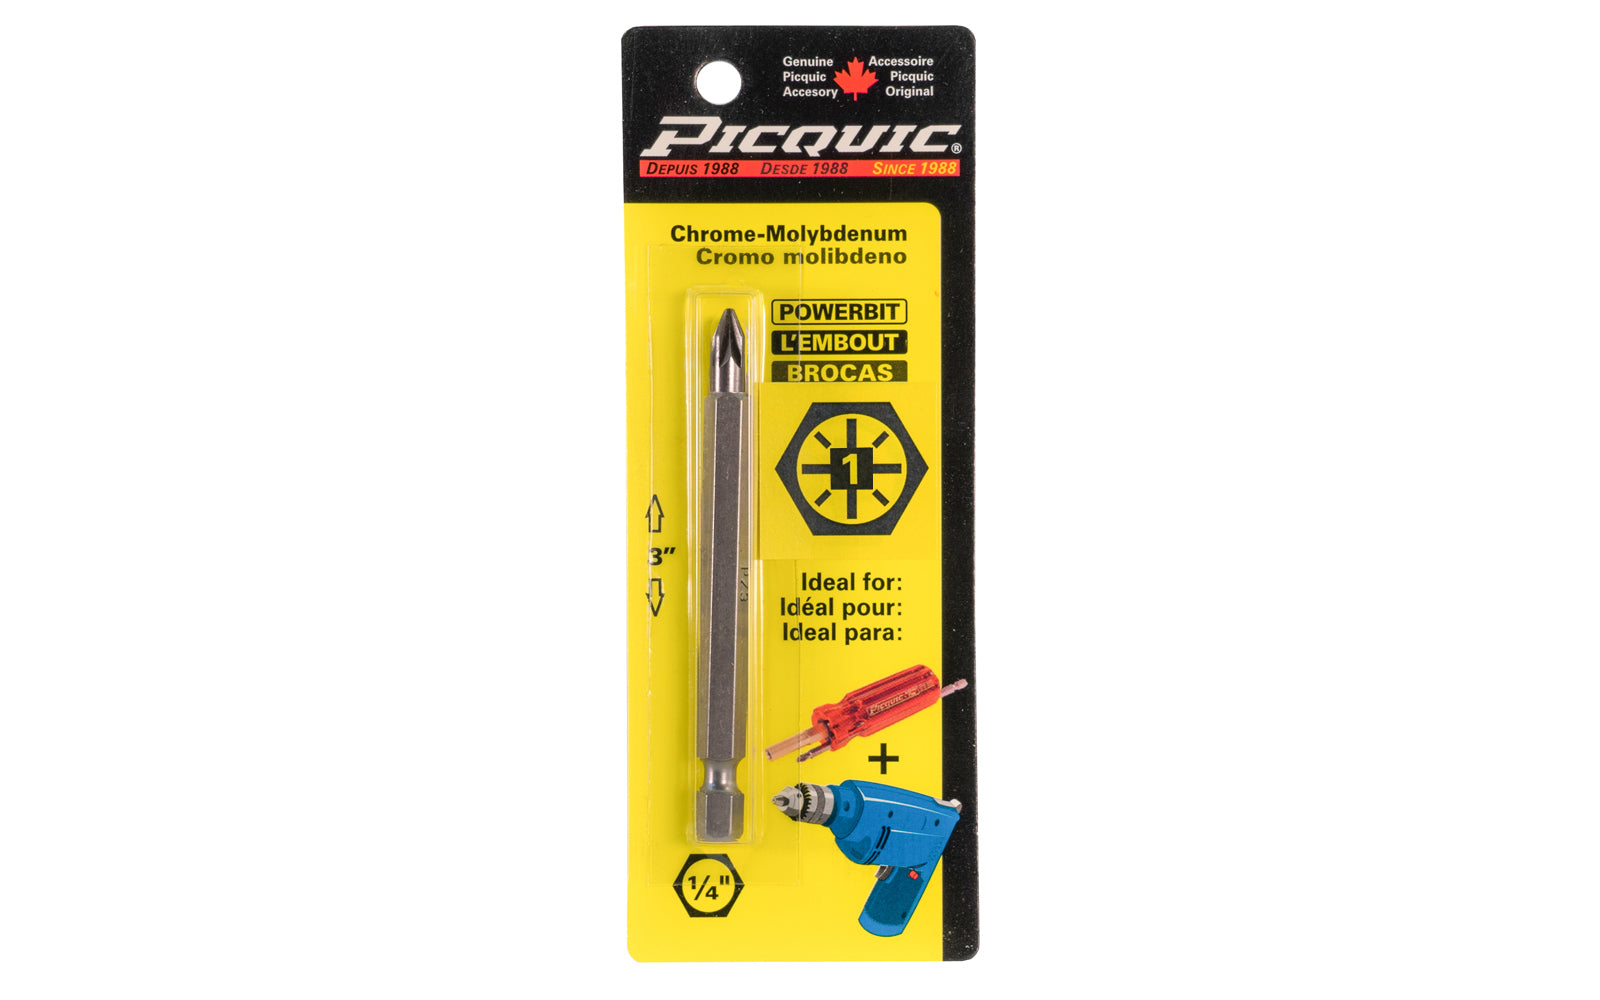 Picquic 3" length powerbit - #1 Pozidrive Bit. 1/4" hex shank power bits ideal for use in drills & impact drivers. Model 88031.